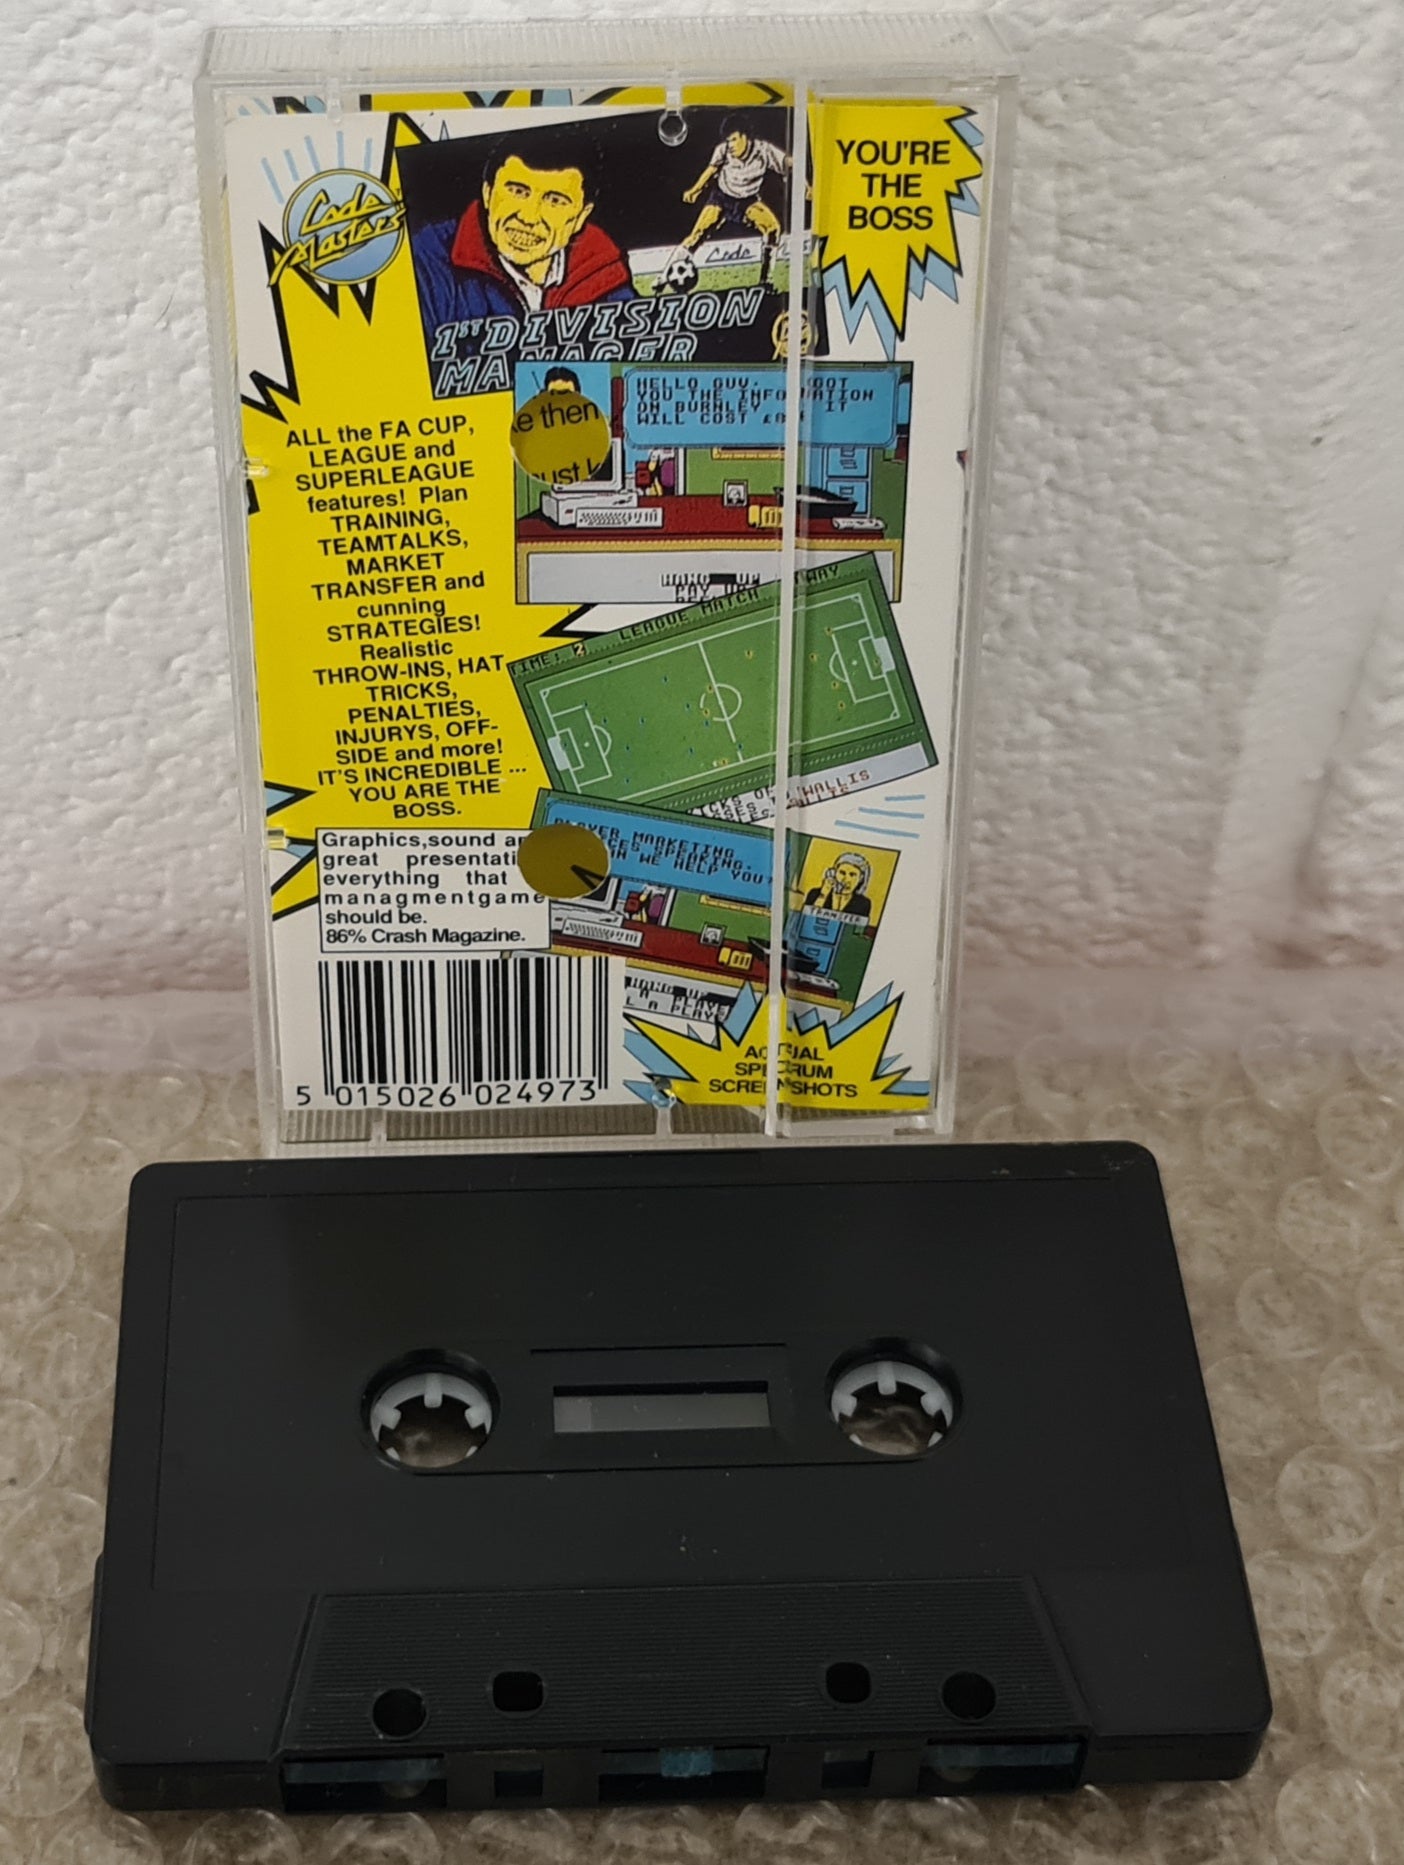 1st Division Manager ZX Spectrum Game